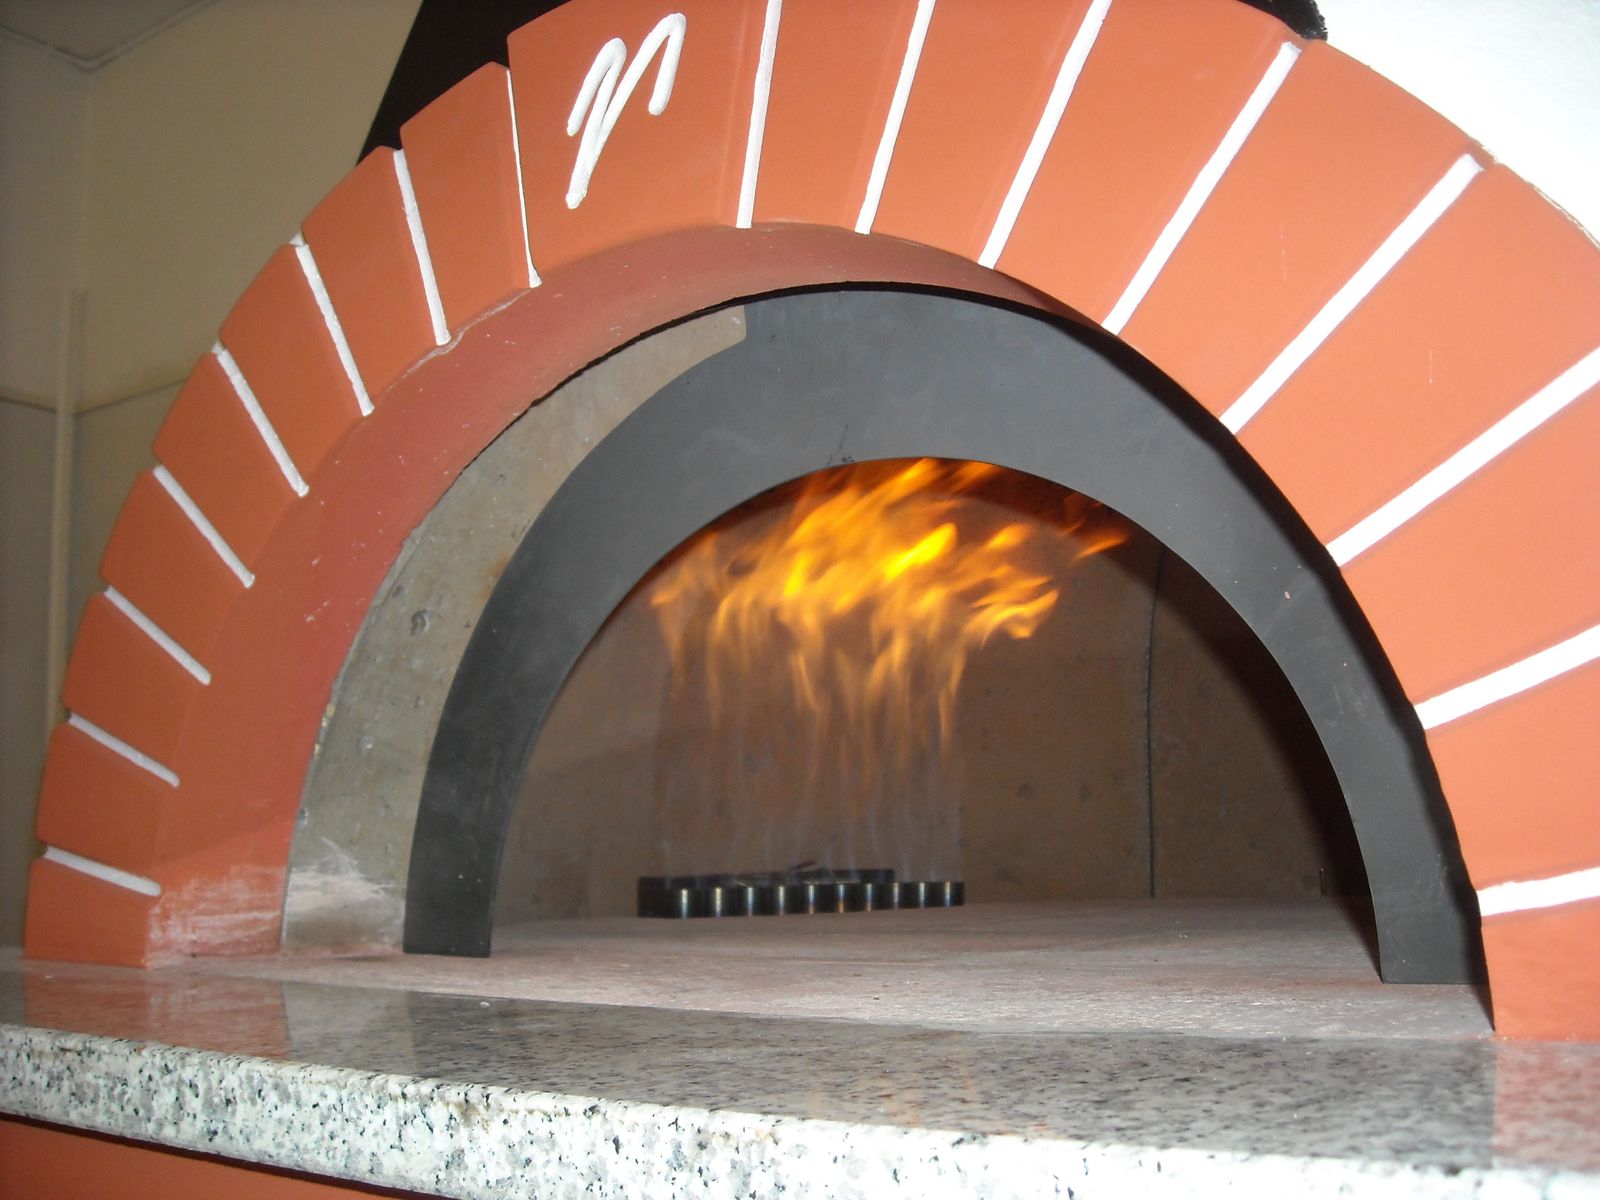 A commercial gas-fired pizza oven from Valoriani UK